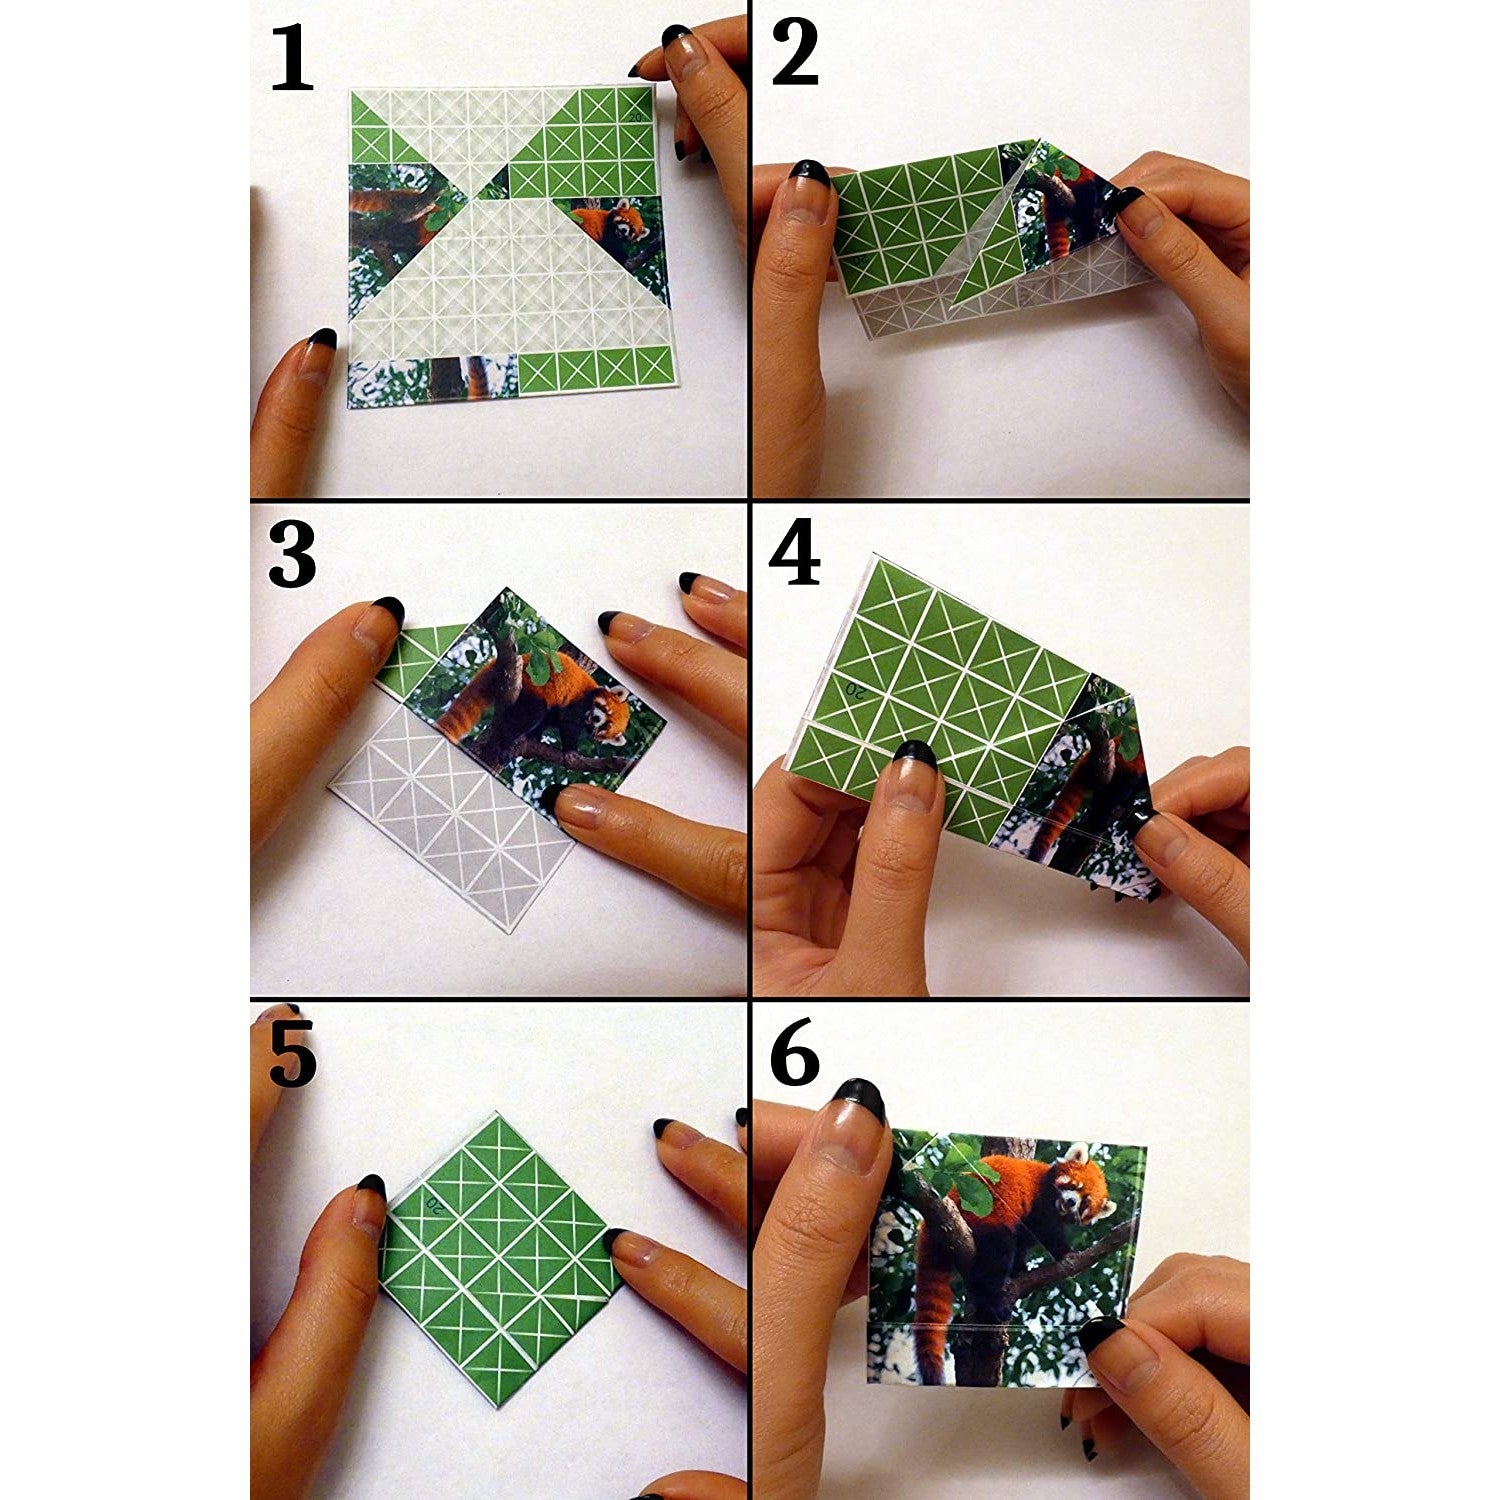 Six steps are shown as to how to complete one of the puzzles from Foldology.